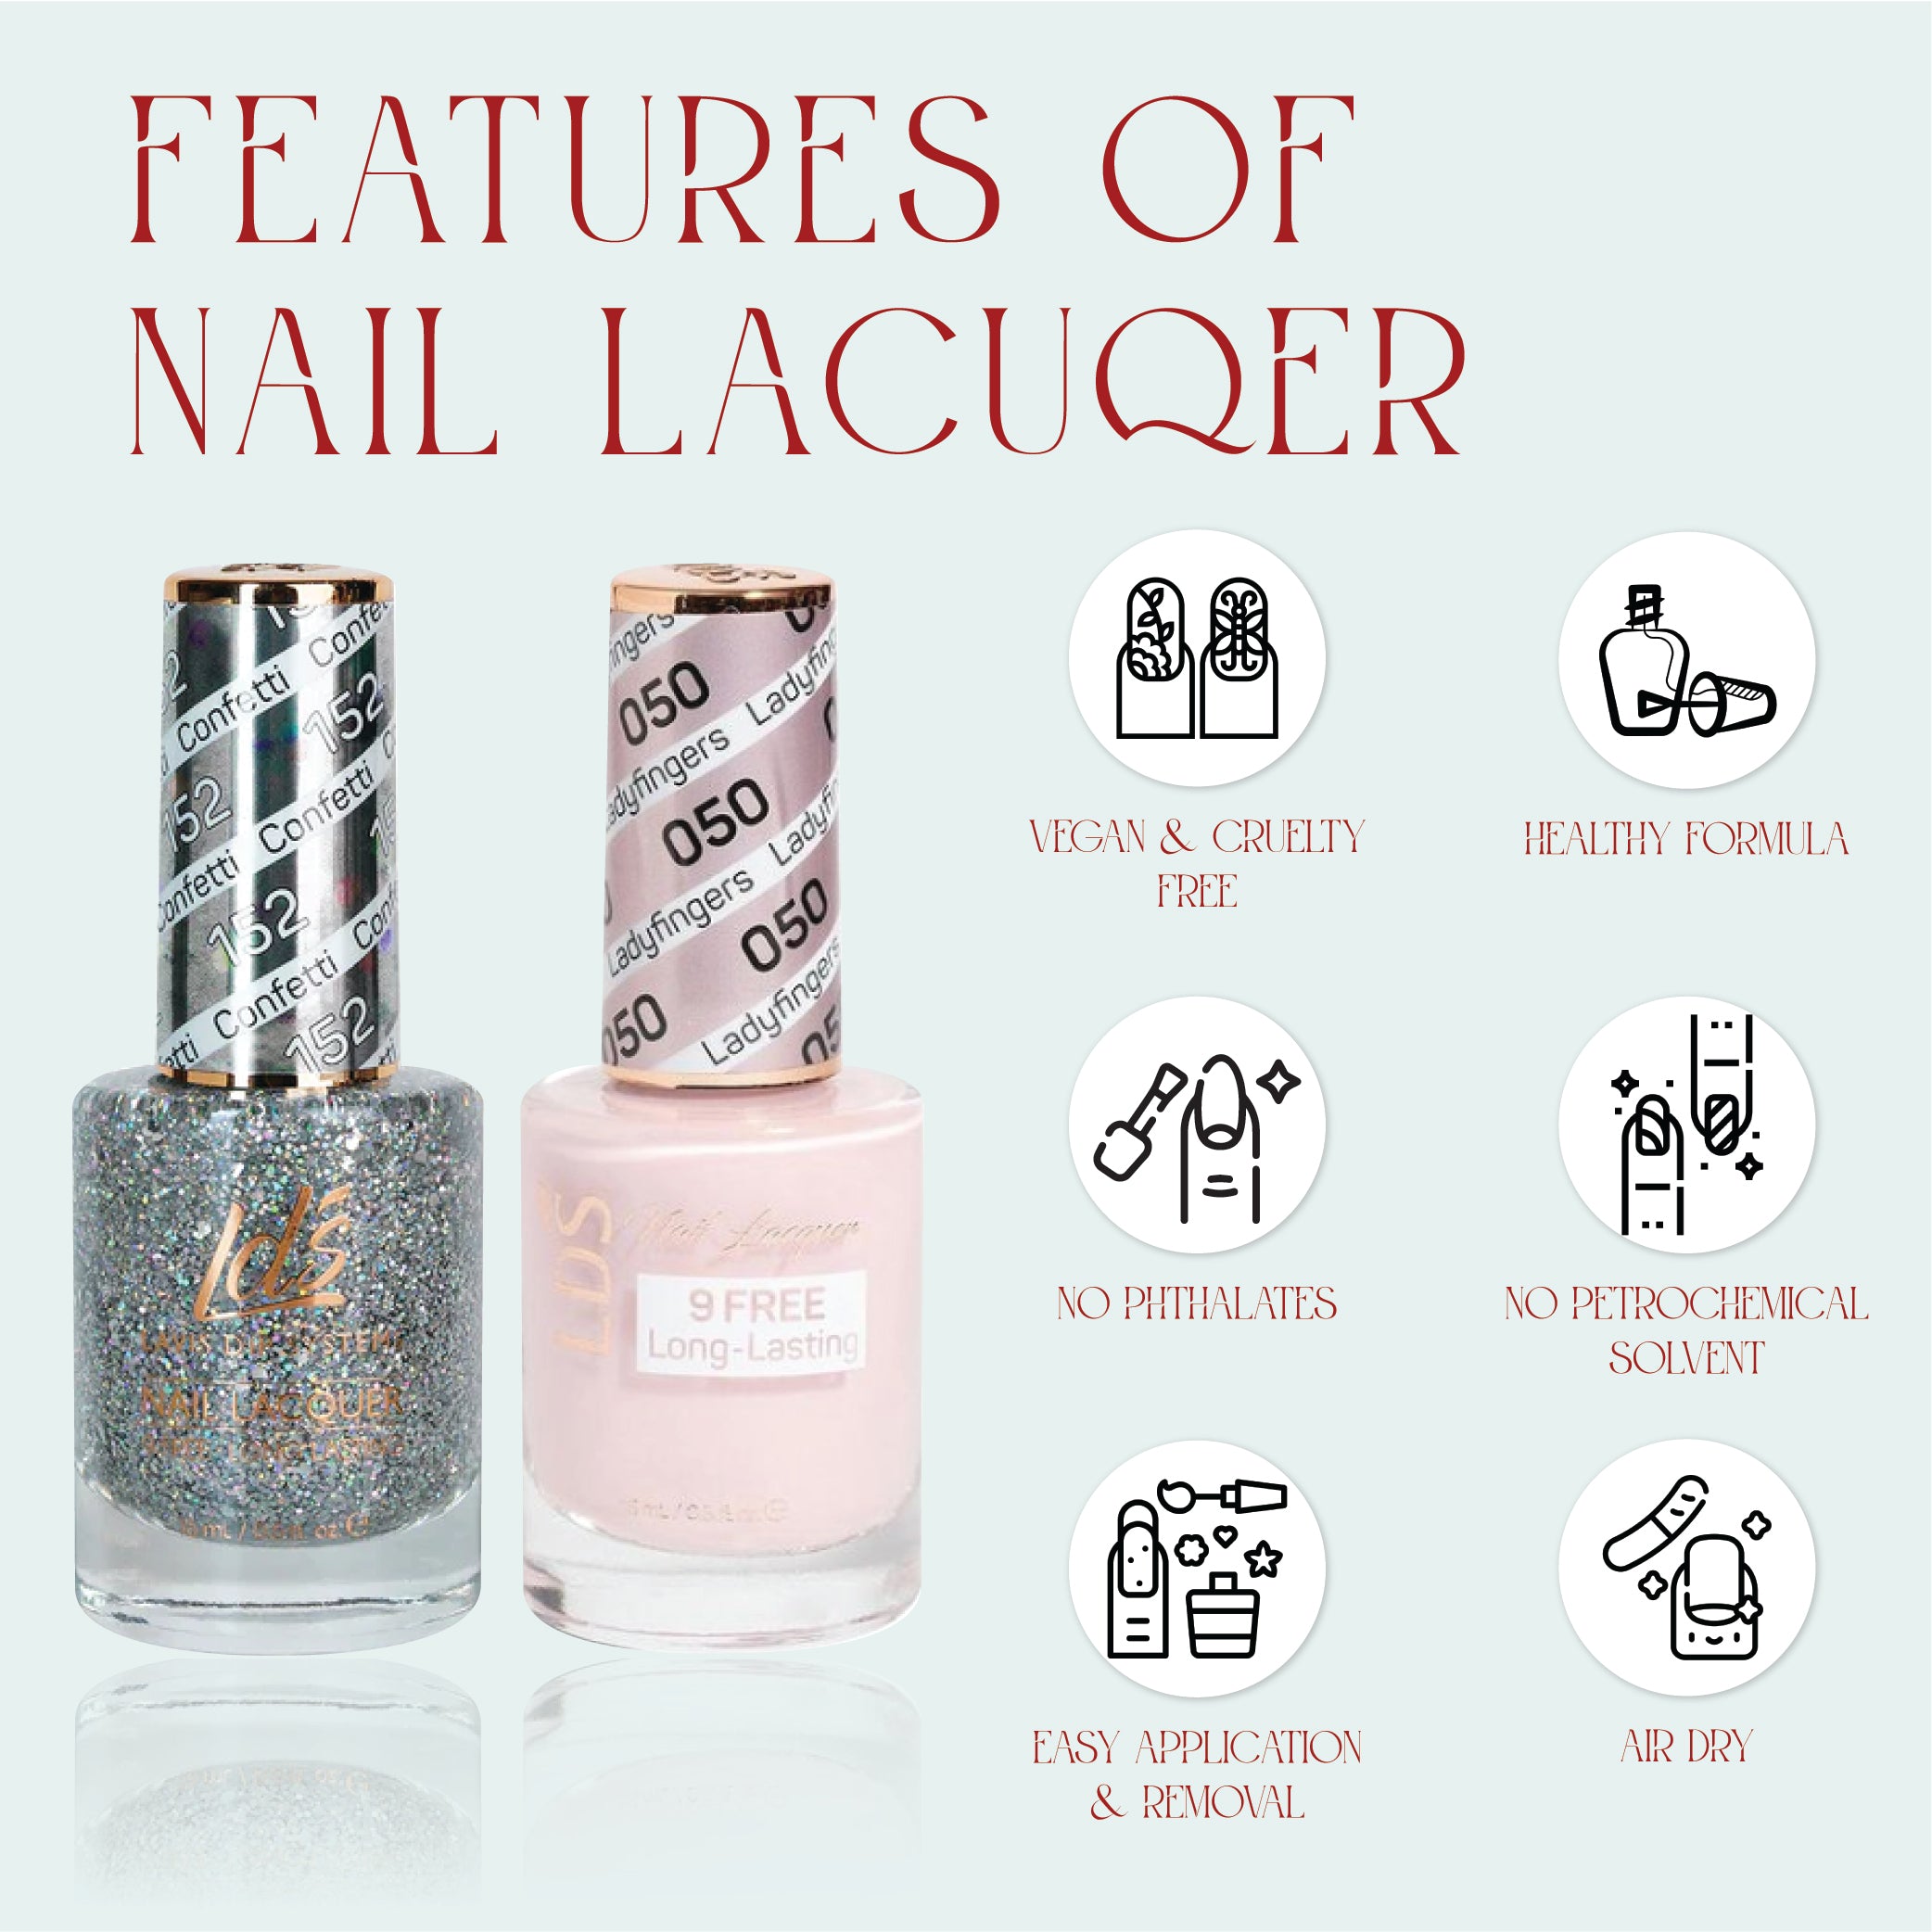 LDS Gel Nail Polish Duo - 106 Beige, Pink Colors - Pink-Y Promise?